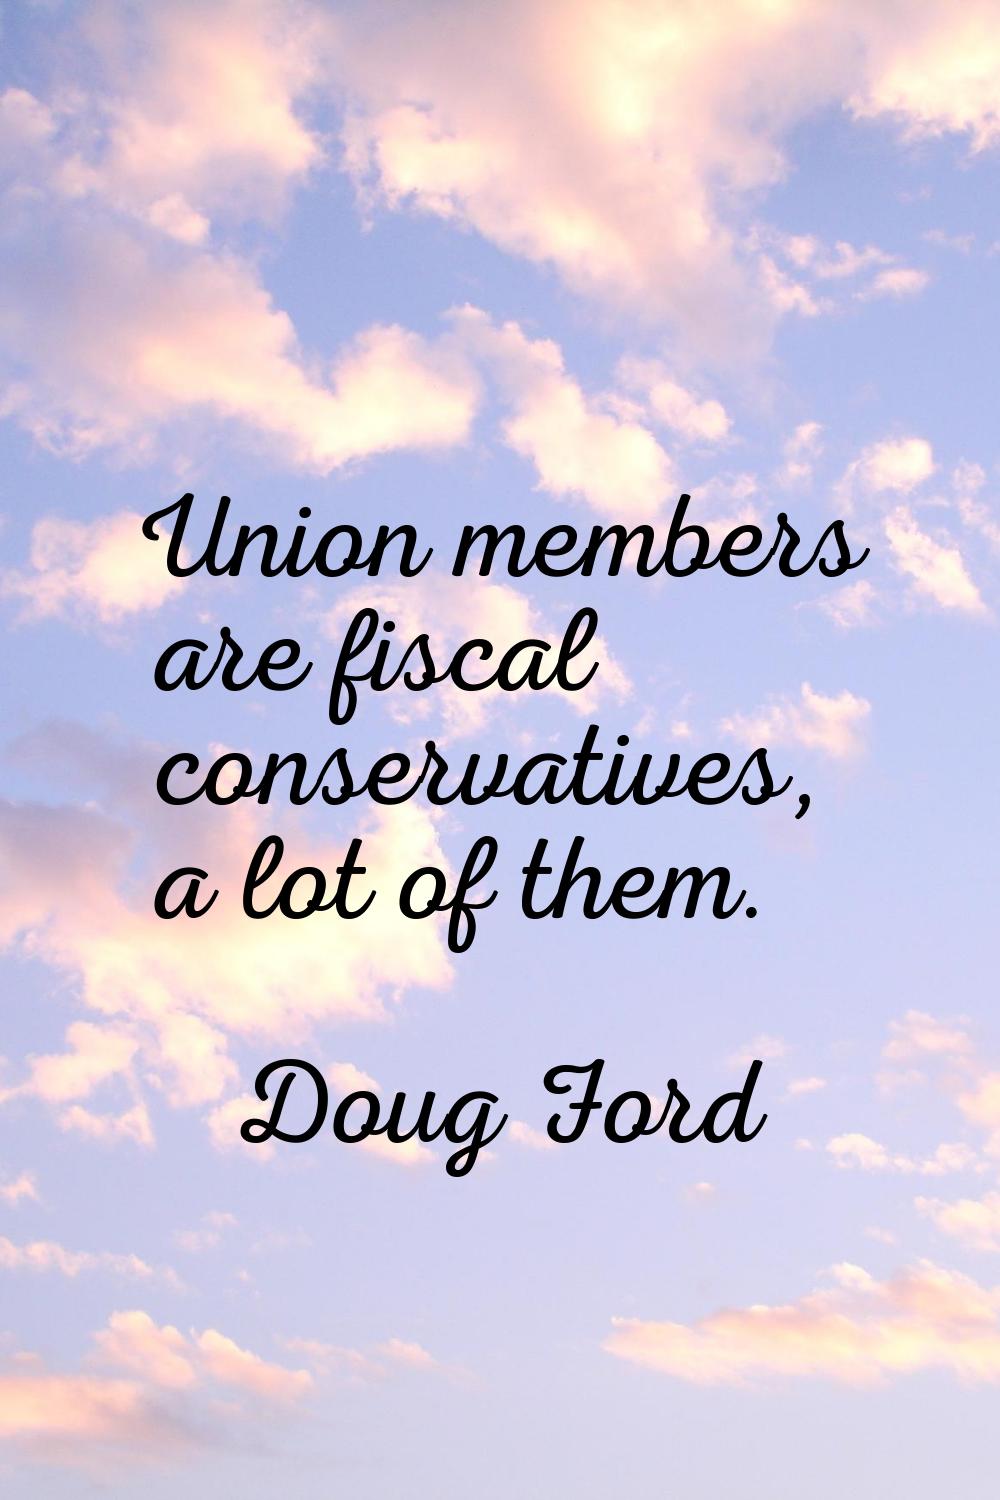 Union members are fiscal conservatives, a lot of them.